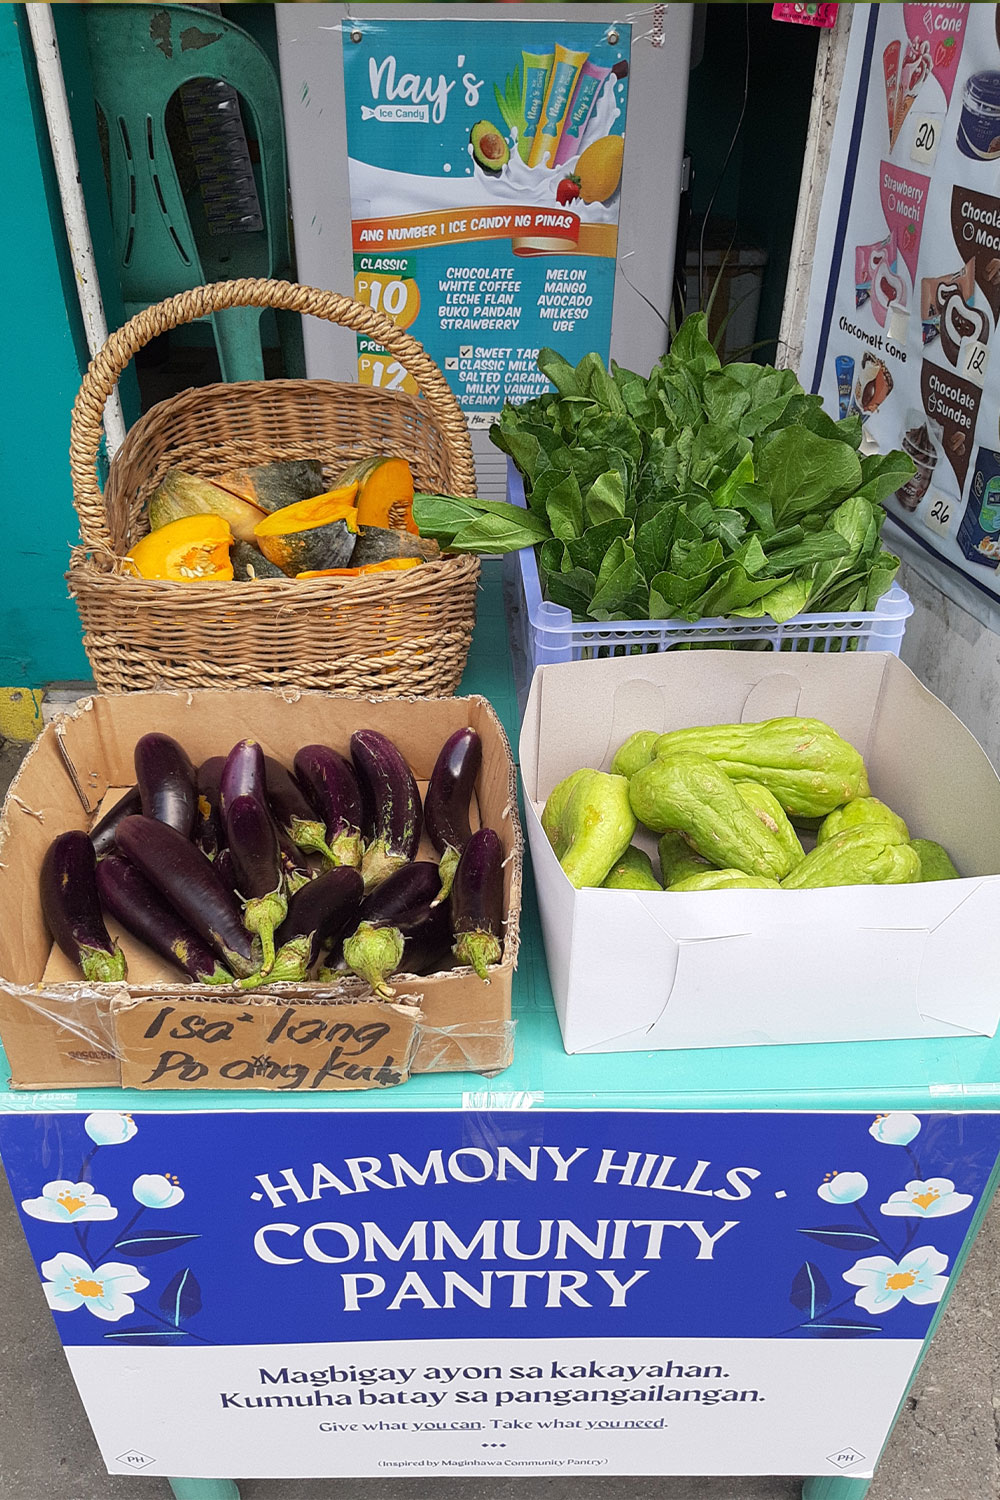 Four different carts of Harmony Hills Community Pantry contain cut pumpkins, eggplants, pak choy, chayote